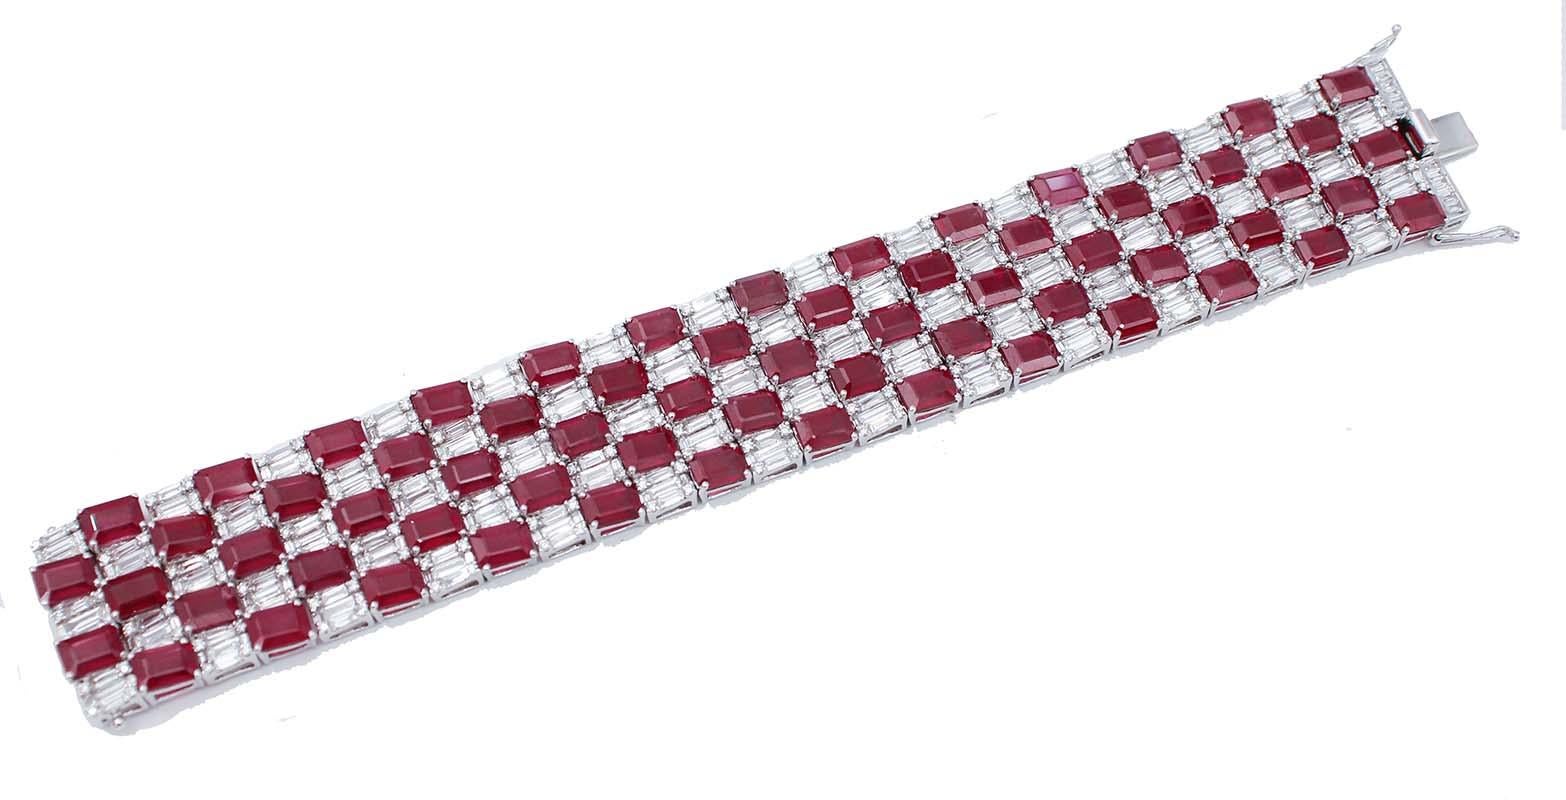 SHIPPING POLICY:
No additional costs will be added to this order.
Shipping costs will be totally covered by the seller (customs duties included). 

Beautiful bracelet in 18 karat white gold structure mounted with rubies and diamonds.
Diamonds 17.10